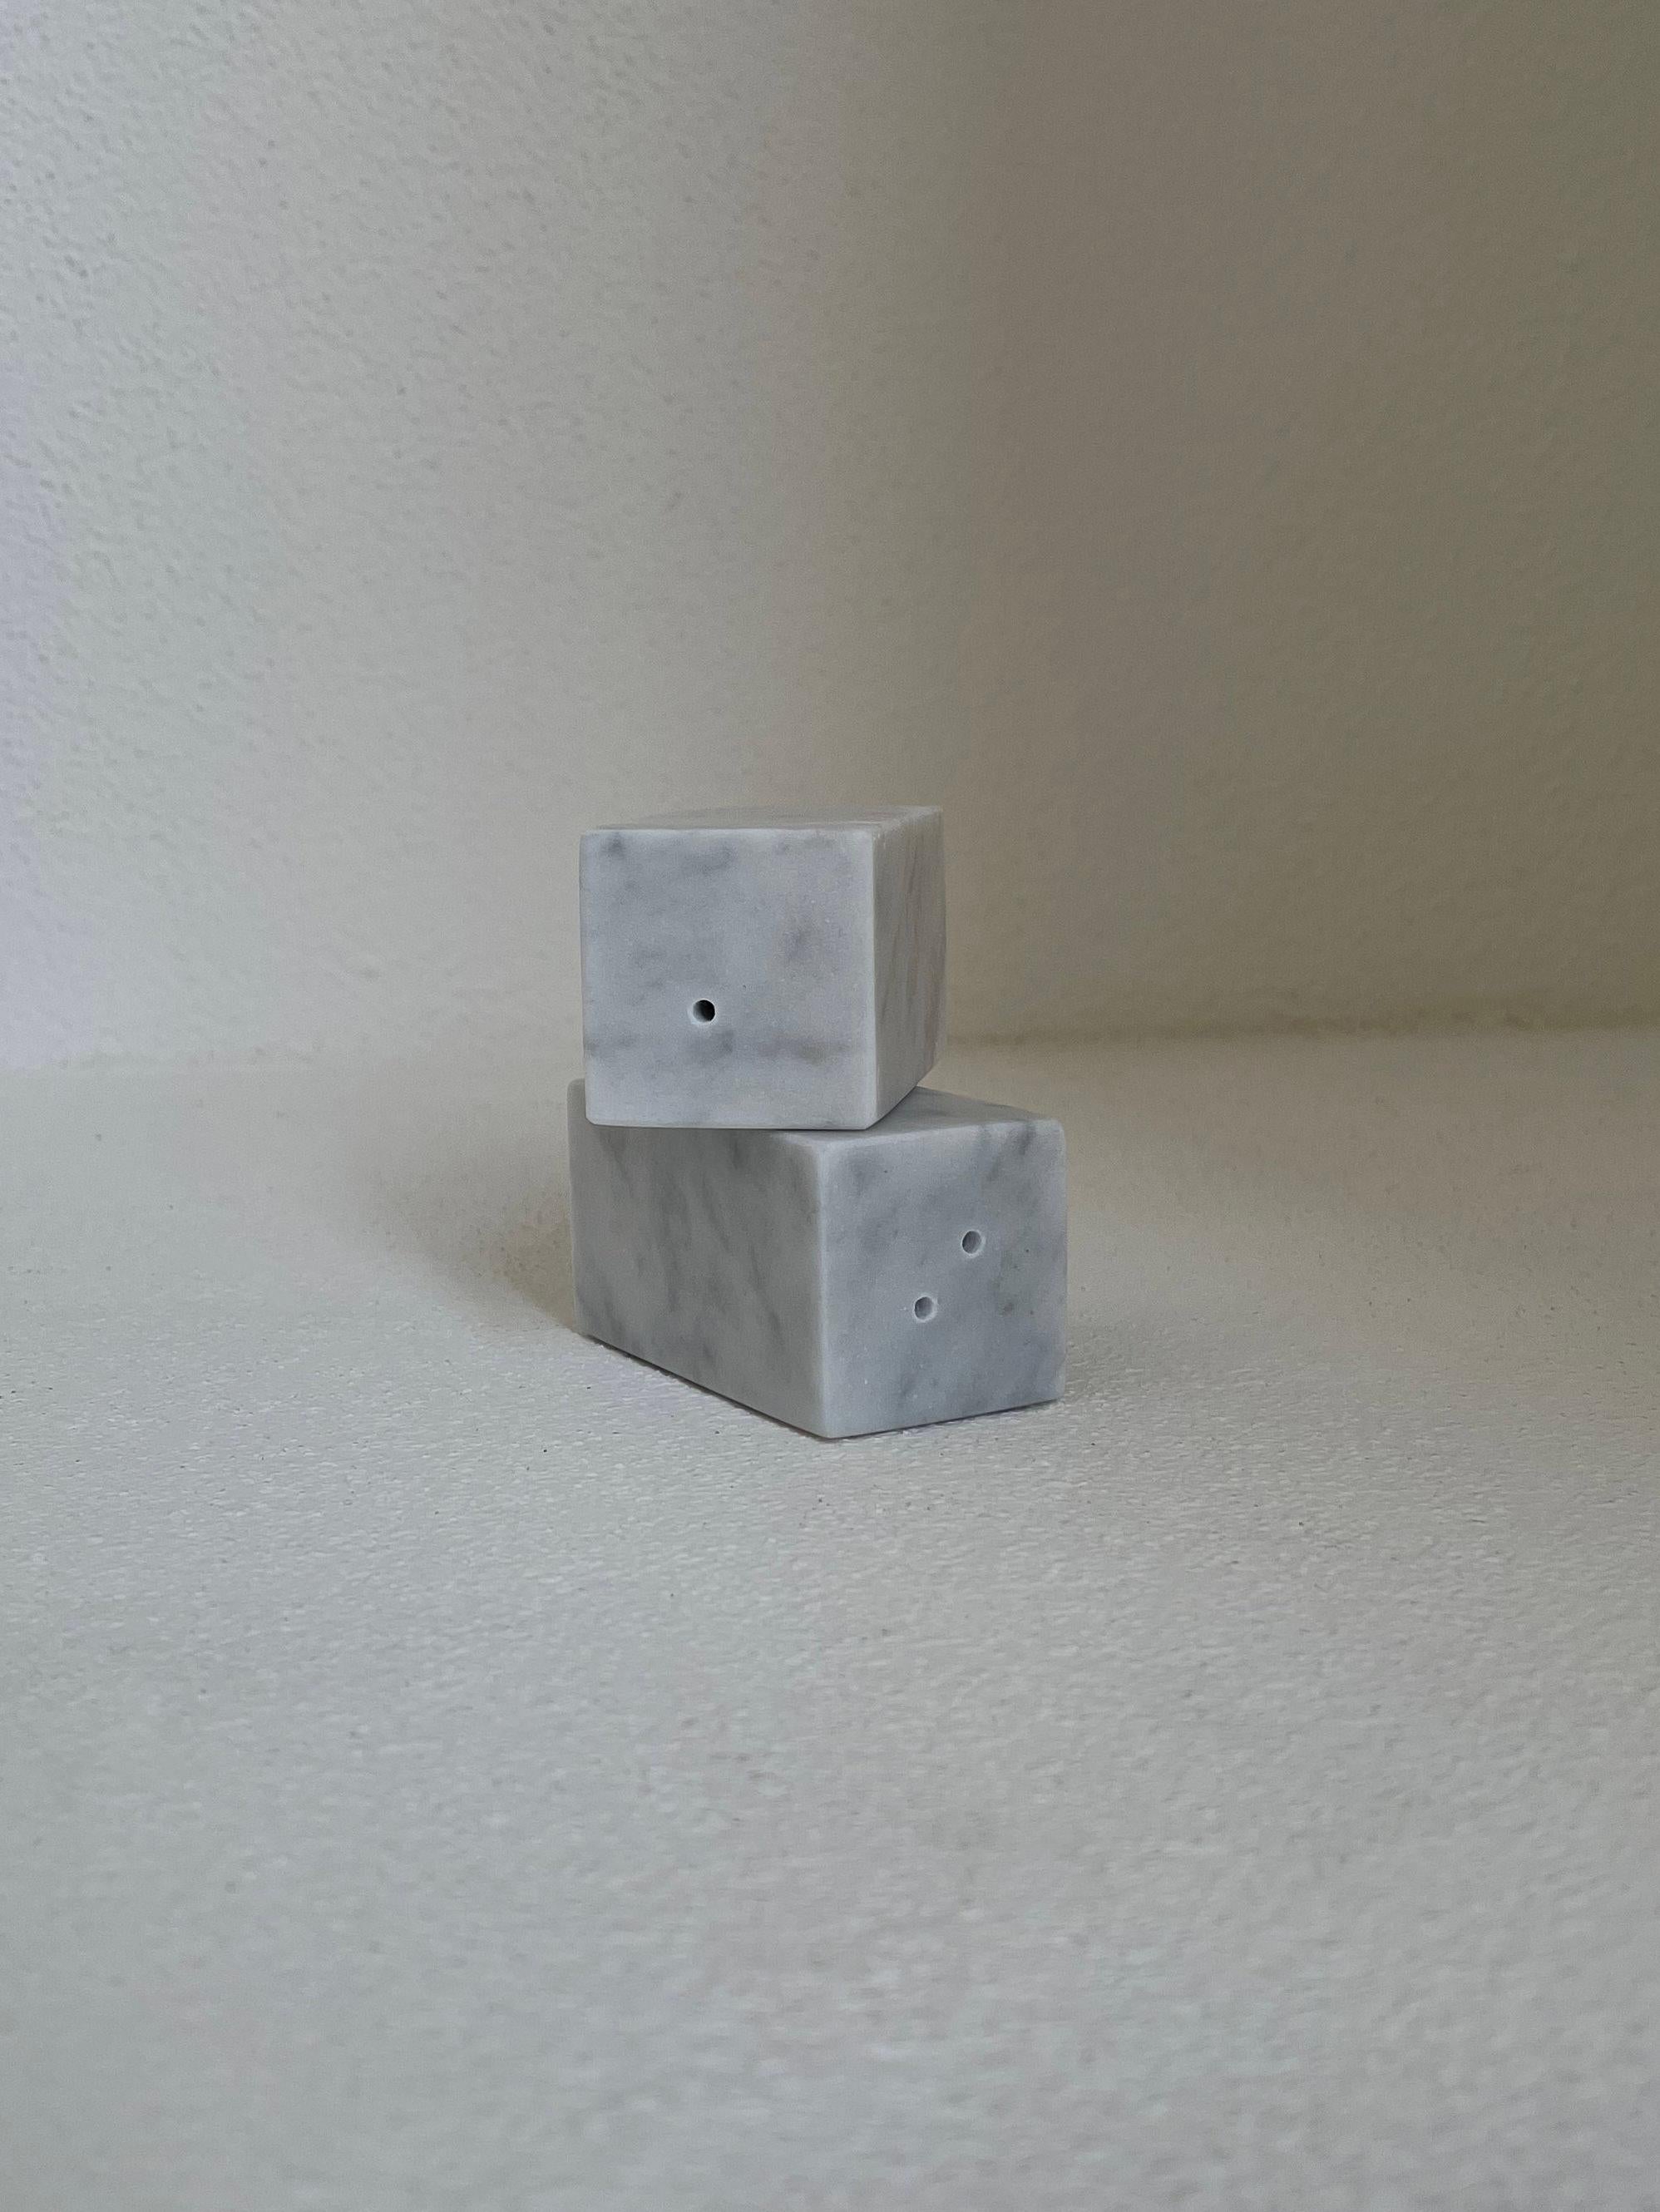 Squared shape salt and pepper set in satin white Carrara marble.
Each piece is in a way unique (since each marble block is different in veins and shades) and handcrafted in Italy. Slight variations in shape, color and size are to be considered a